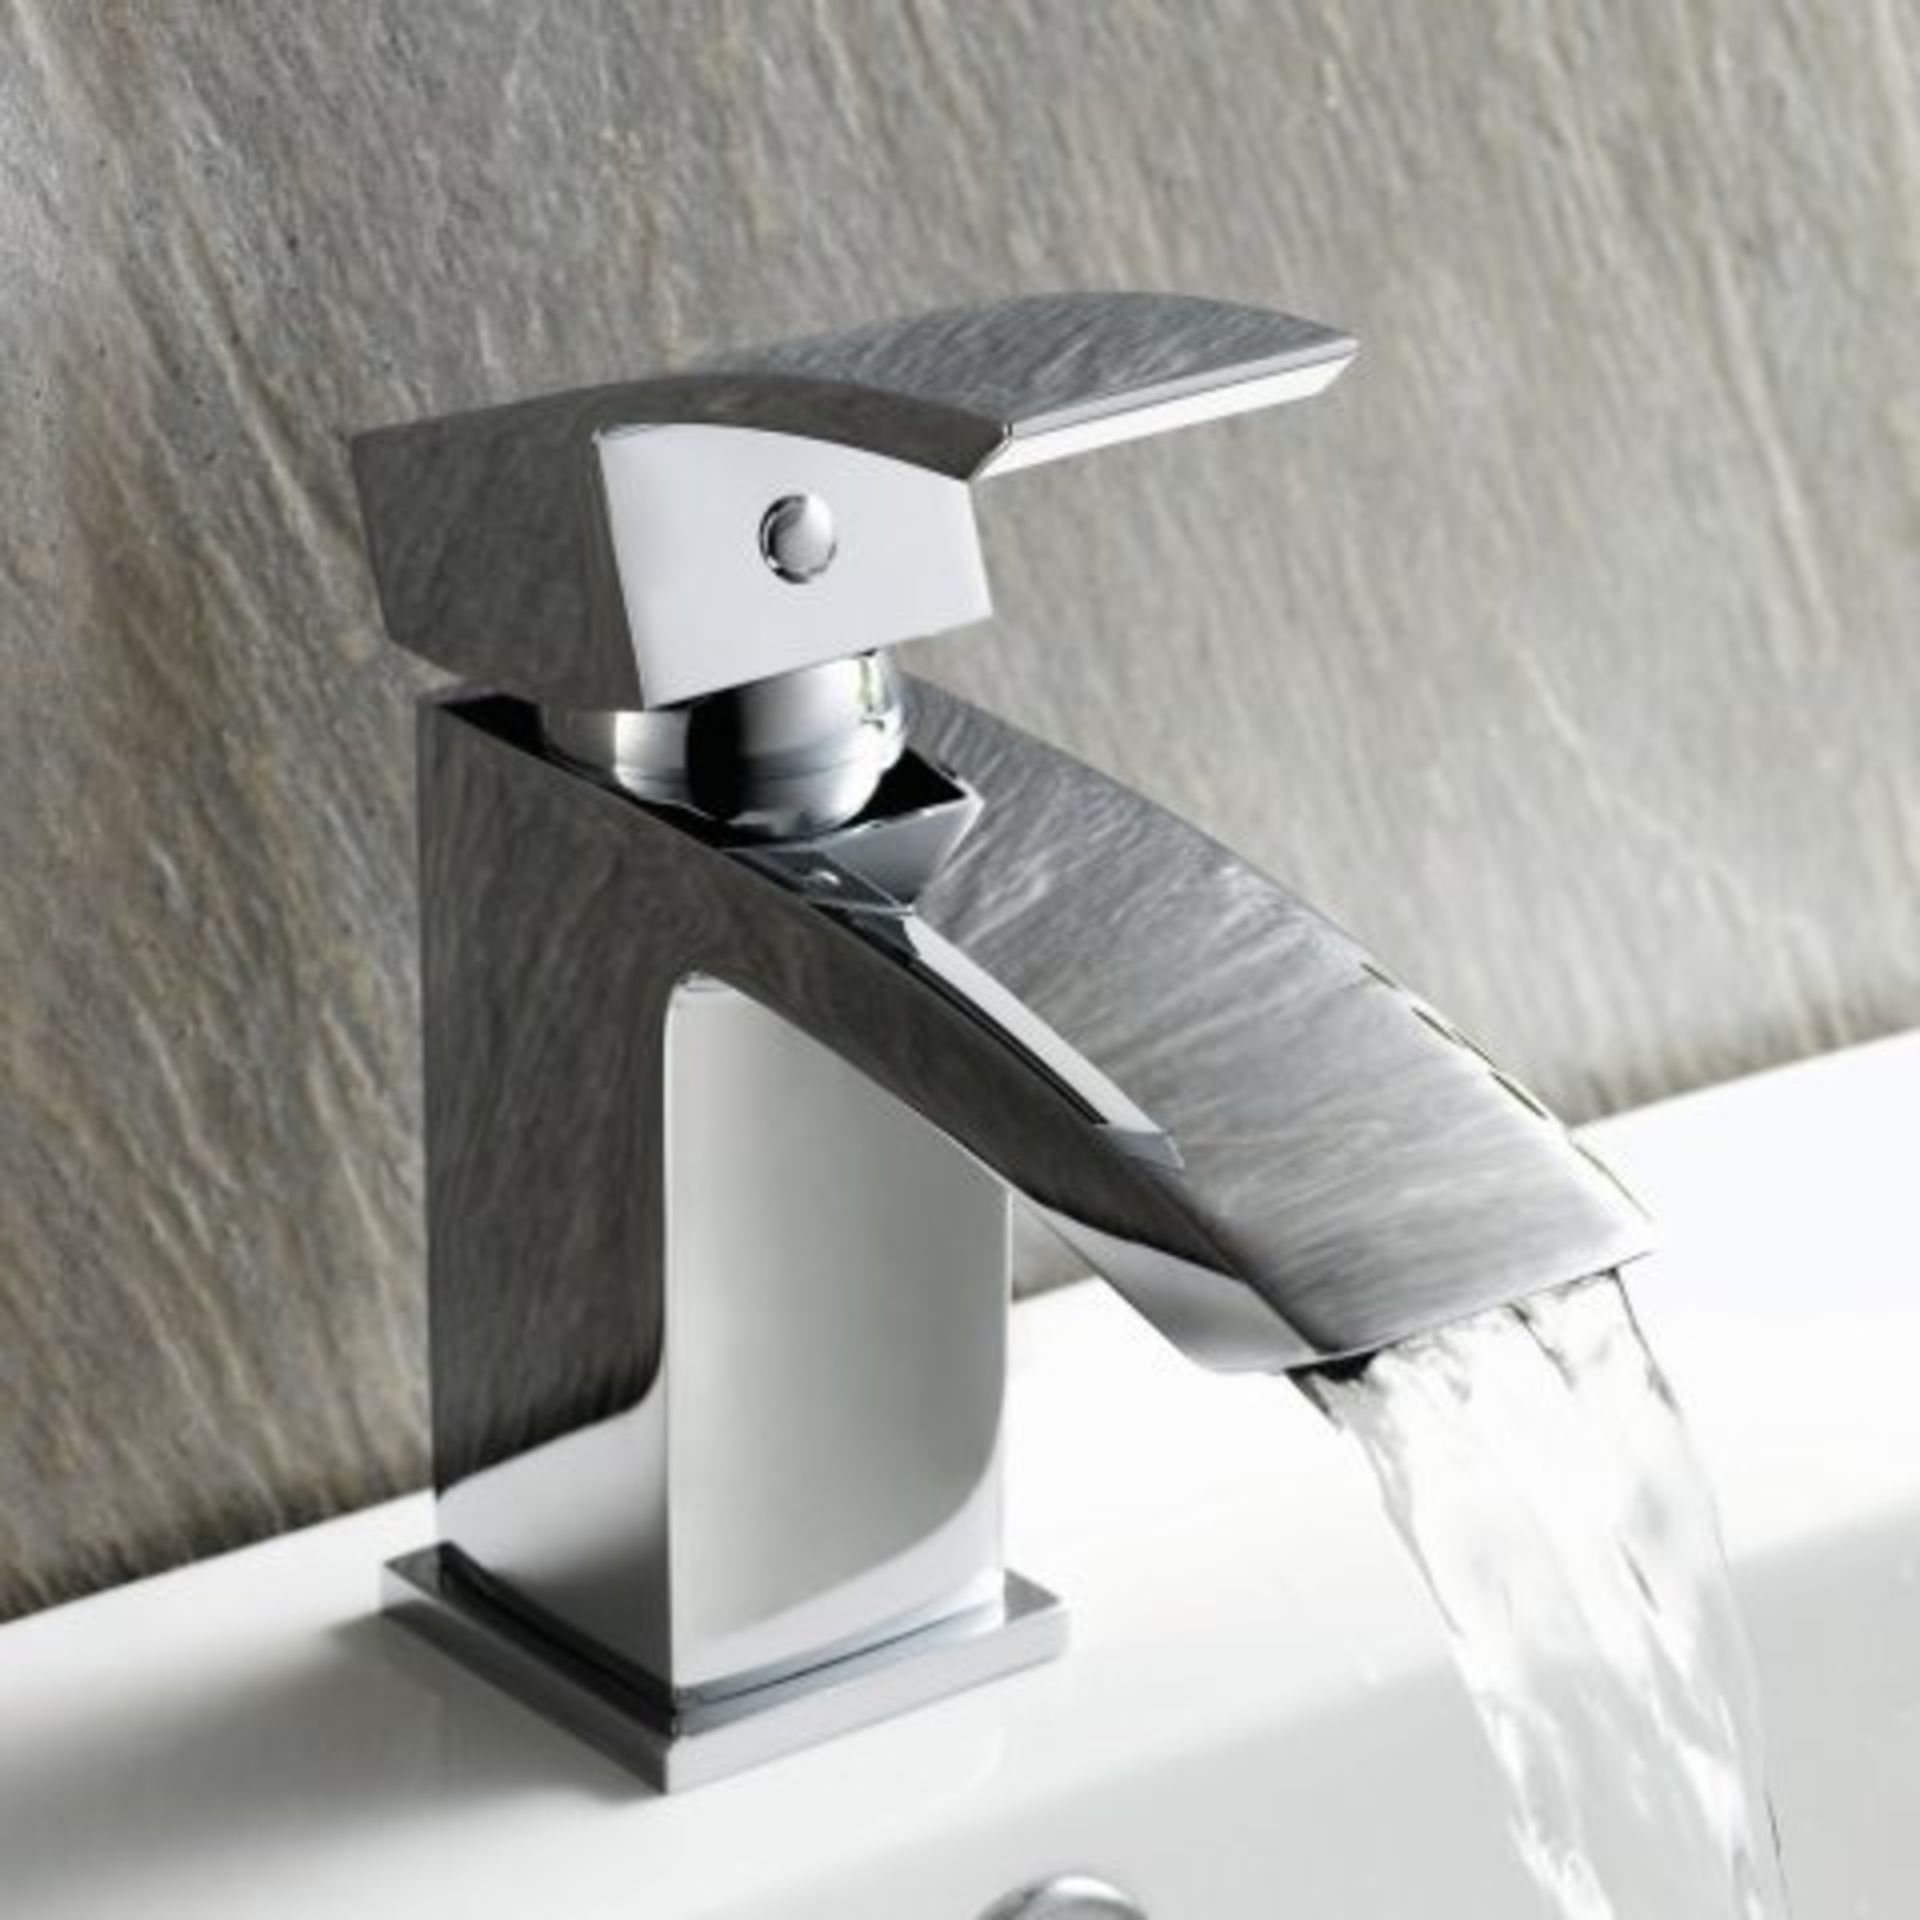 (AA182) Keila Basin Mixer Tap Assured Performance Maintenance free technology is incorporated in our